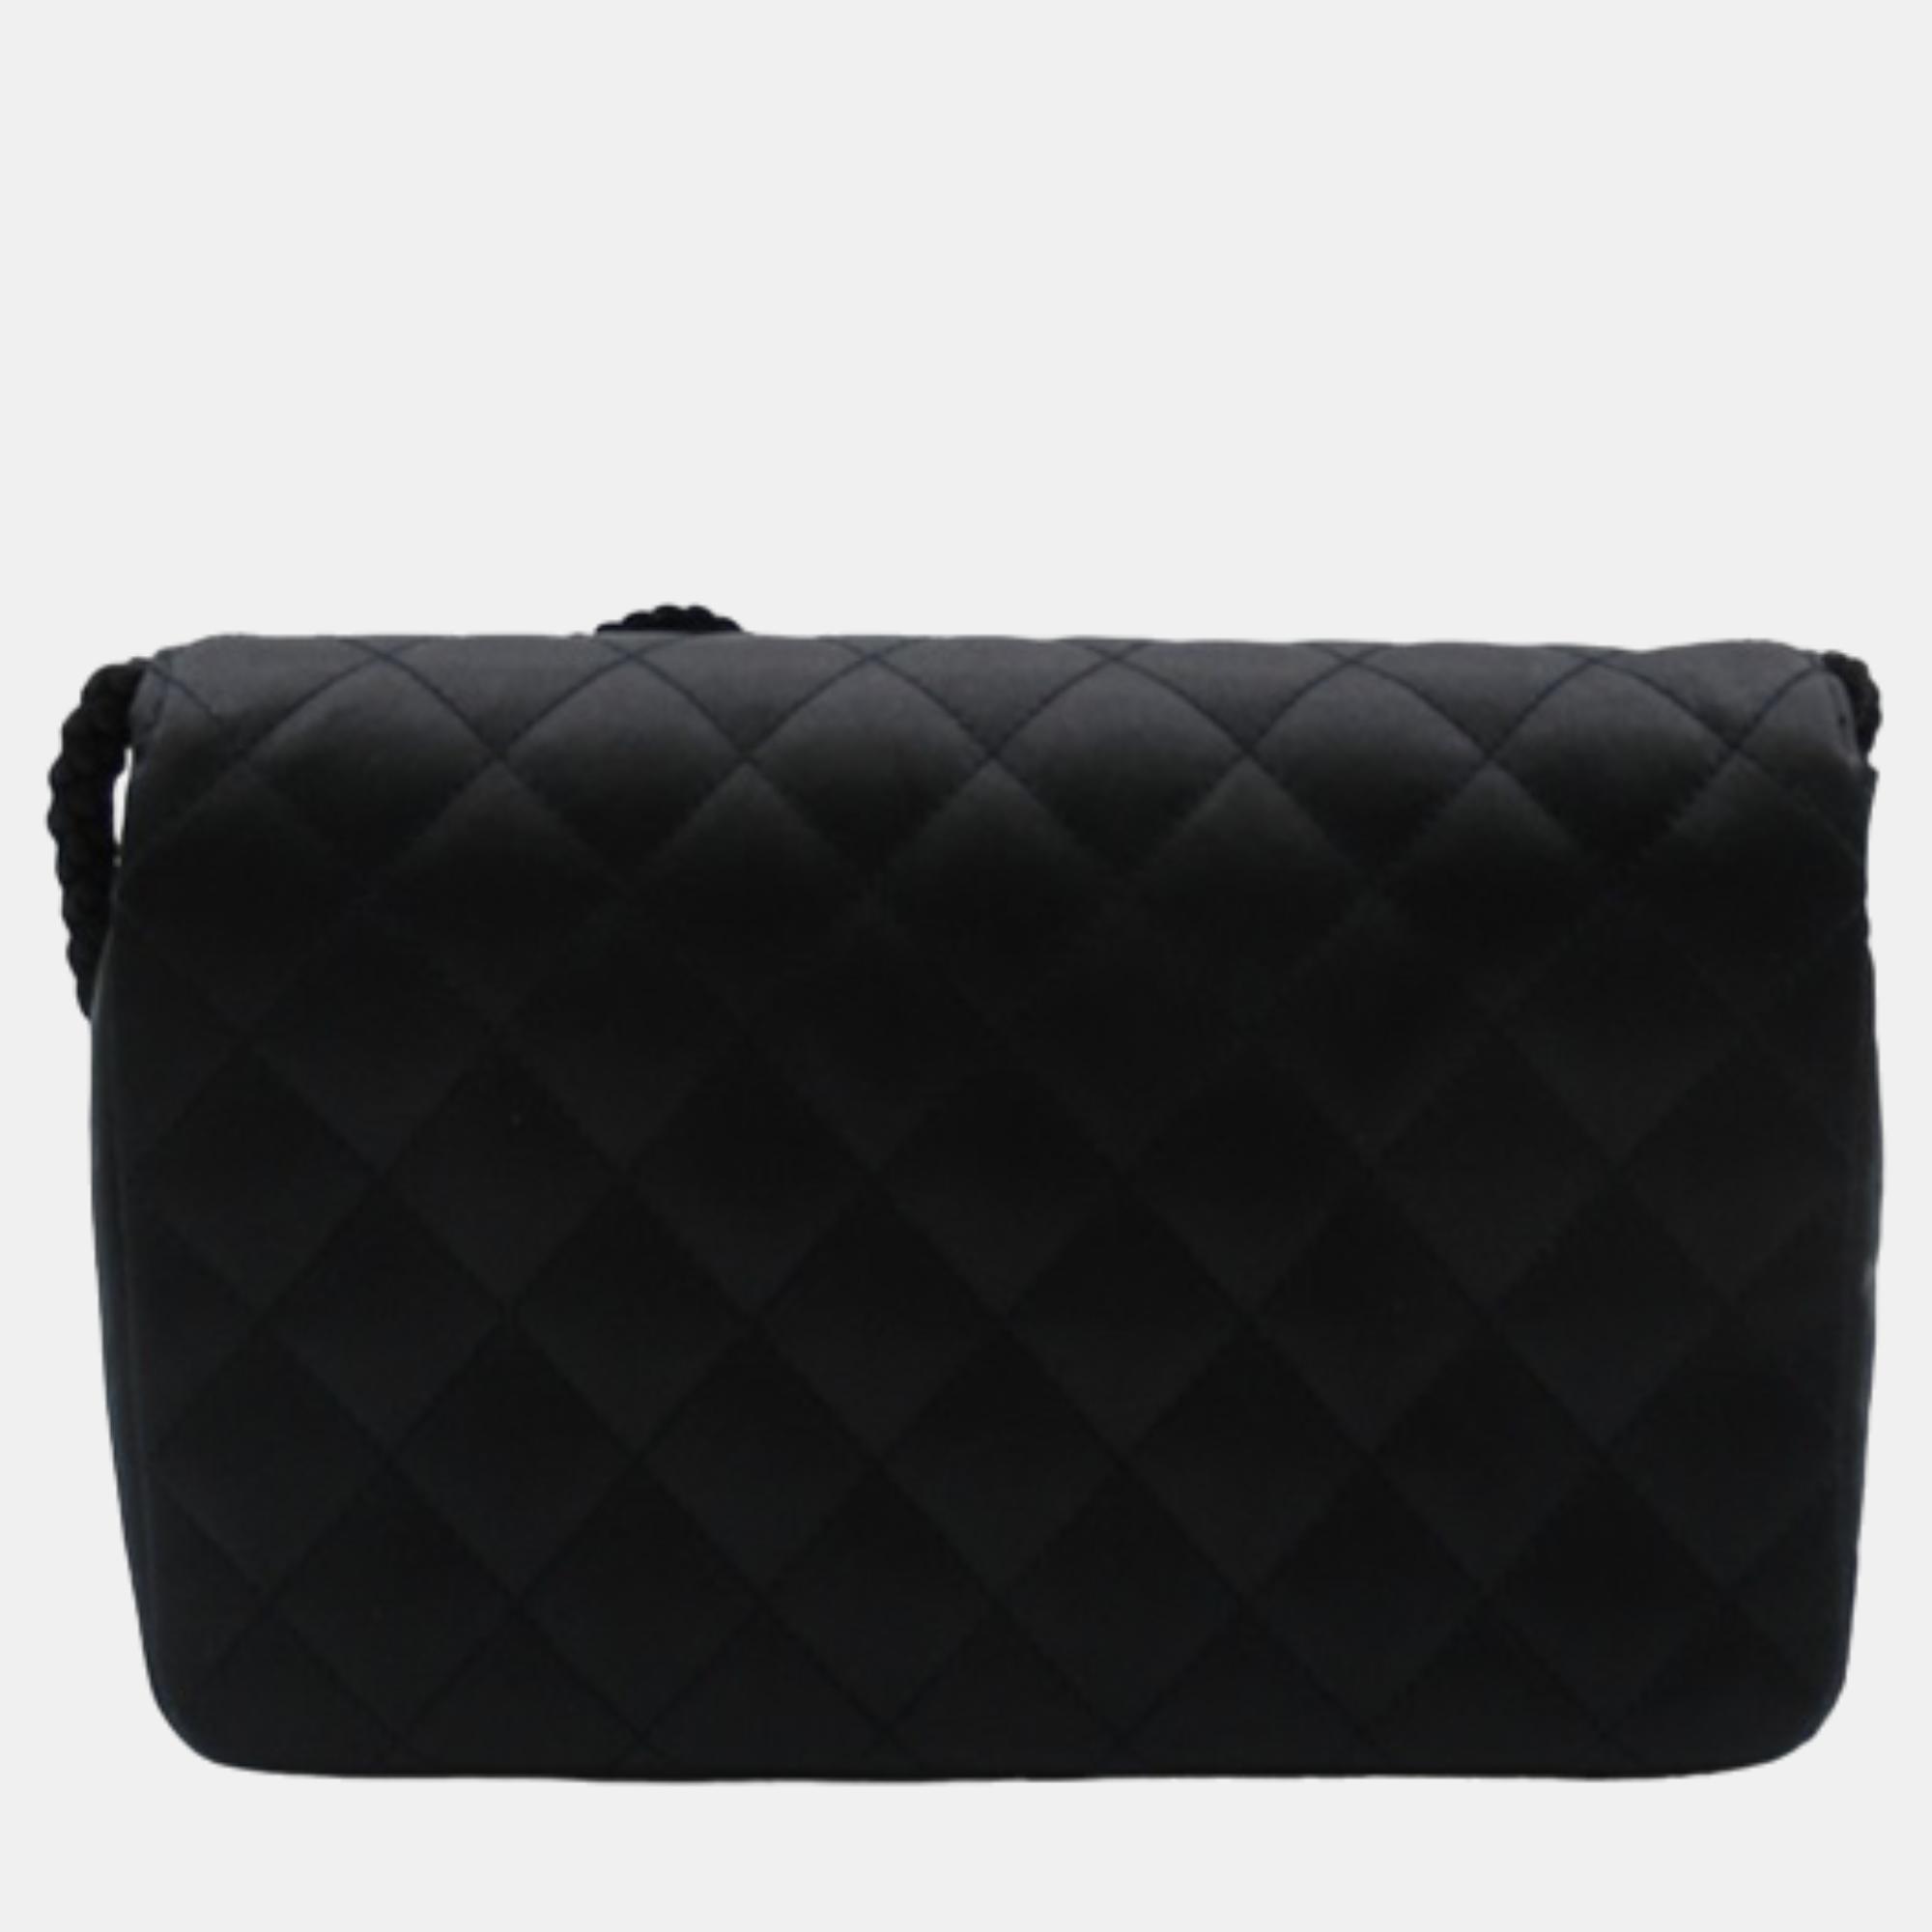 Chanel Black Canvas Quilted Satin Camellia Flap Bag